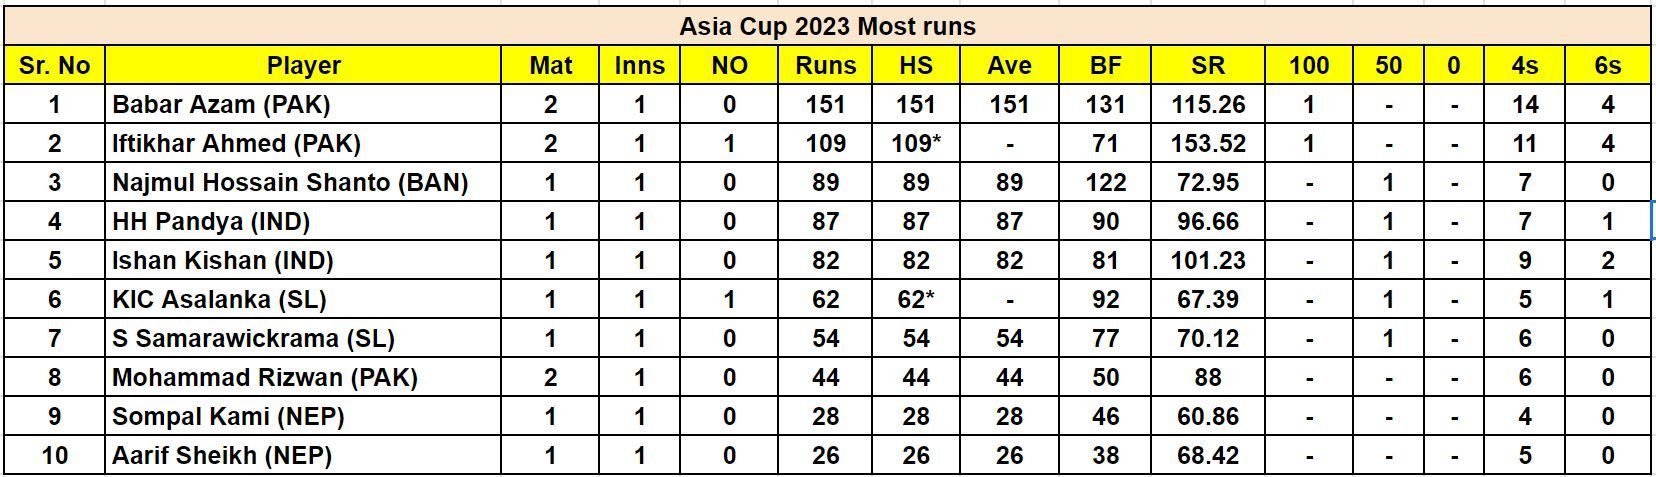 Asia Cup 2023 Most Runs